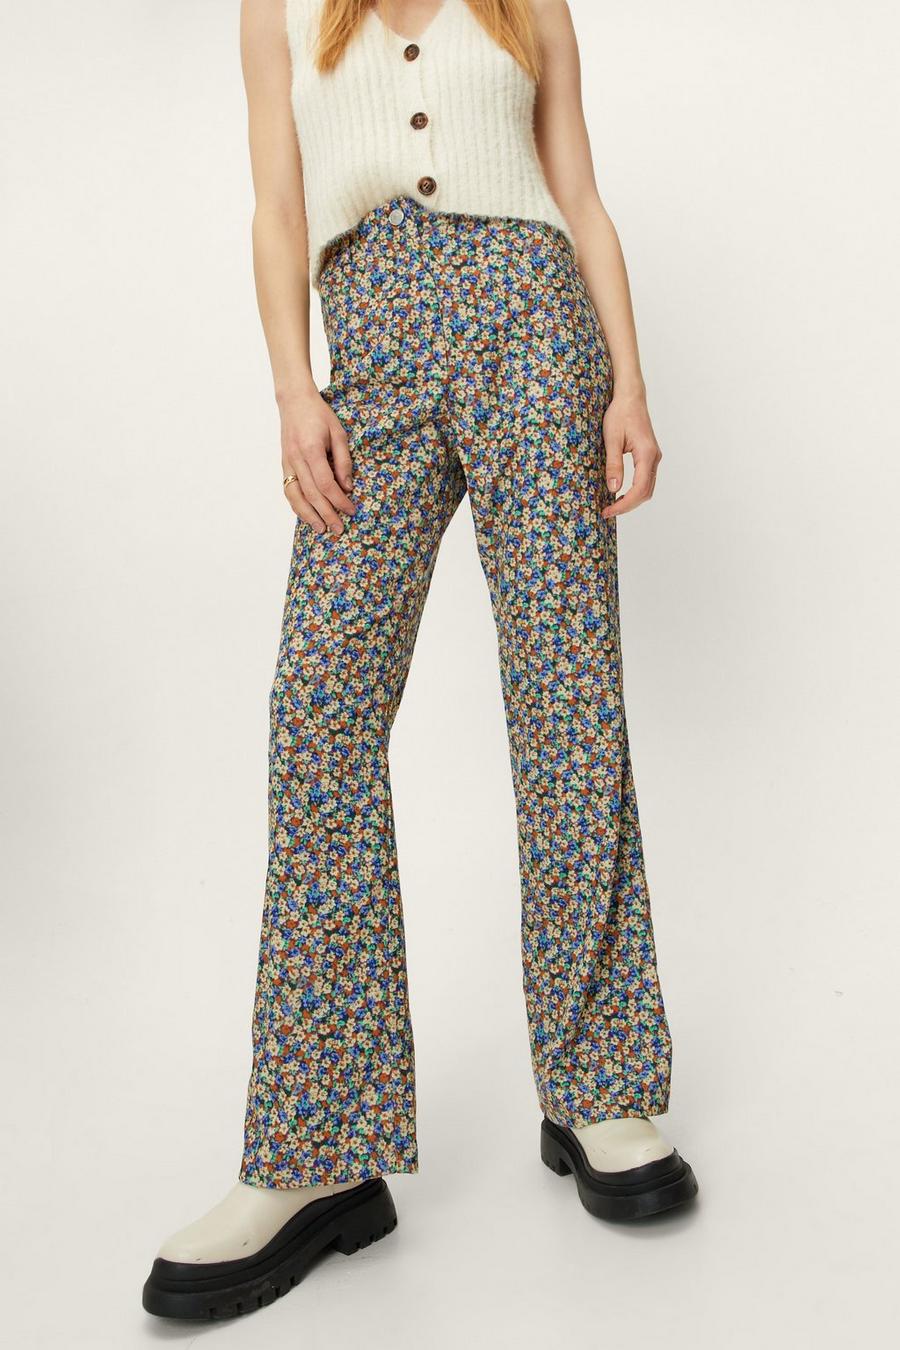 Twill High Waisted Floral Print Flared Trousers